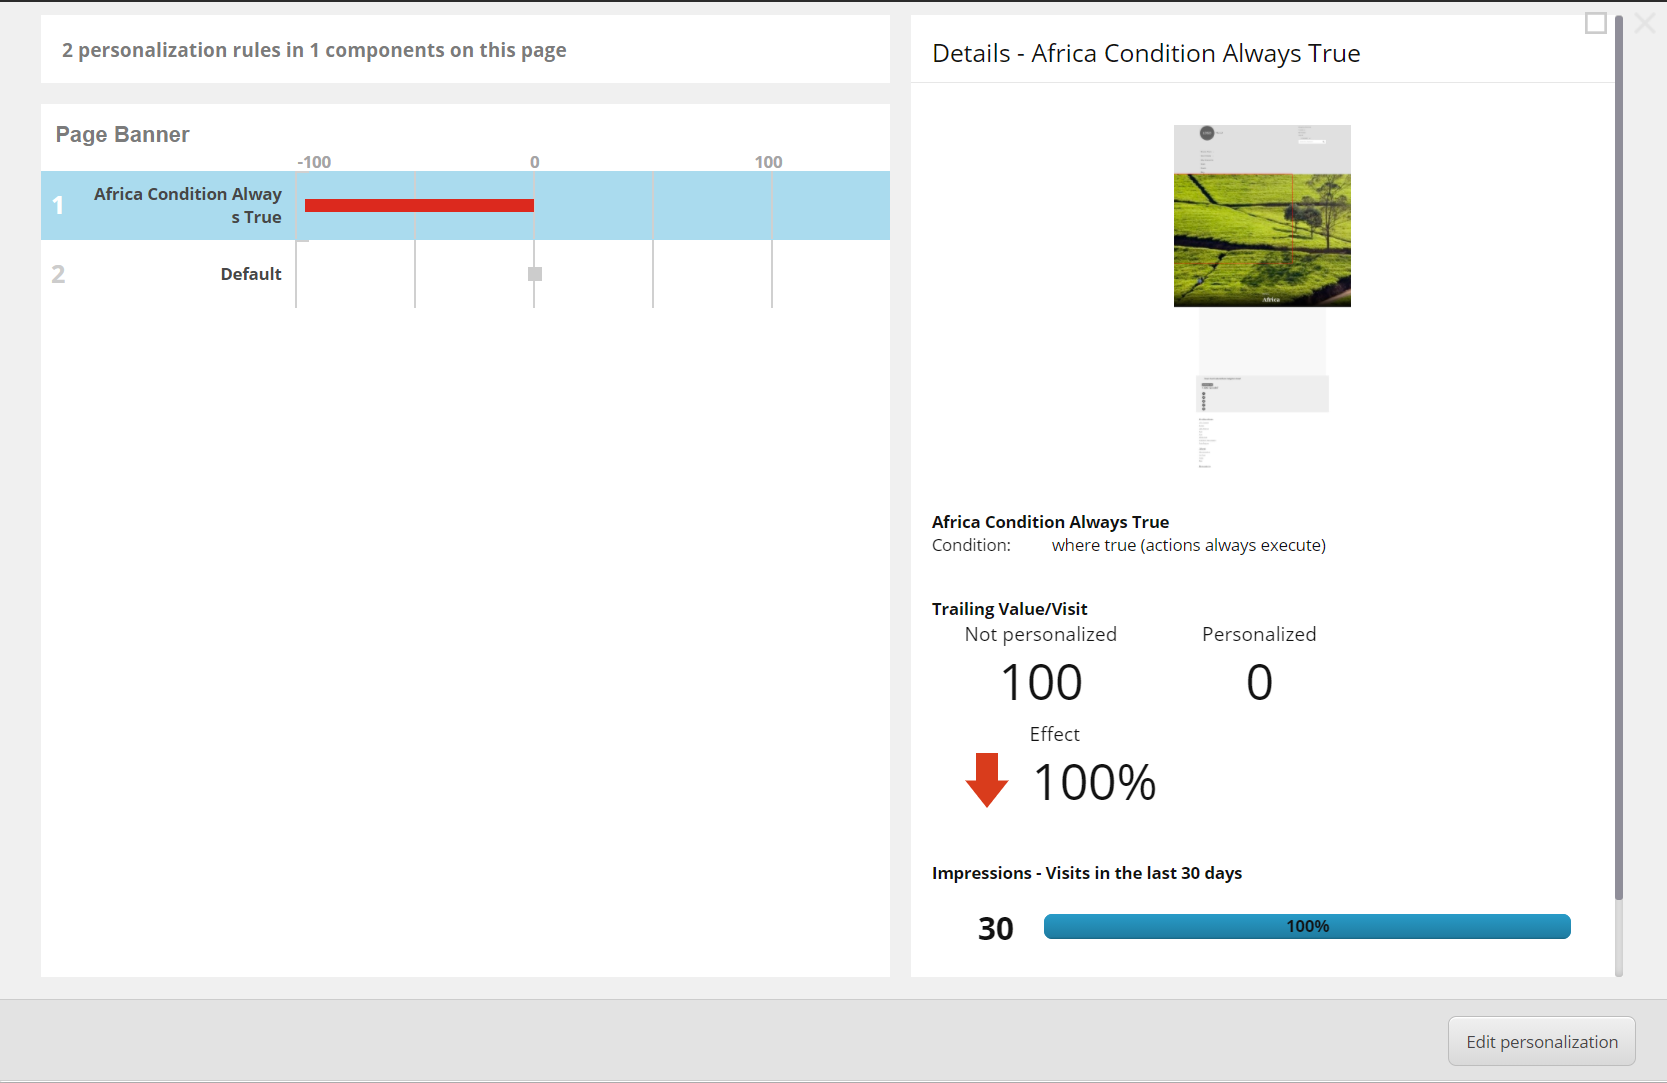 A screenshot of Sitecore's Effect Tracking reporting, where a page banner "Africa Condition Always True" had 100% less engagement value than the default experience.